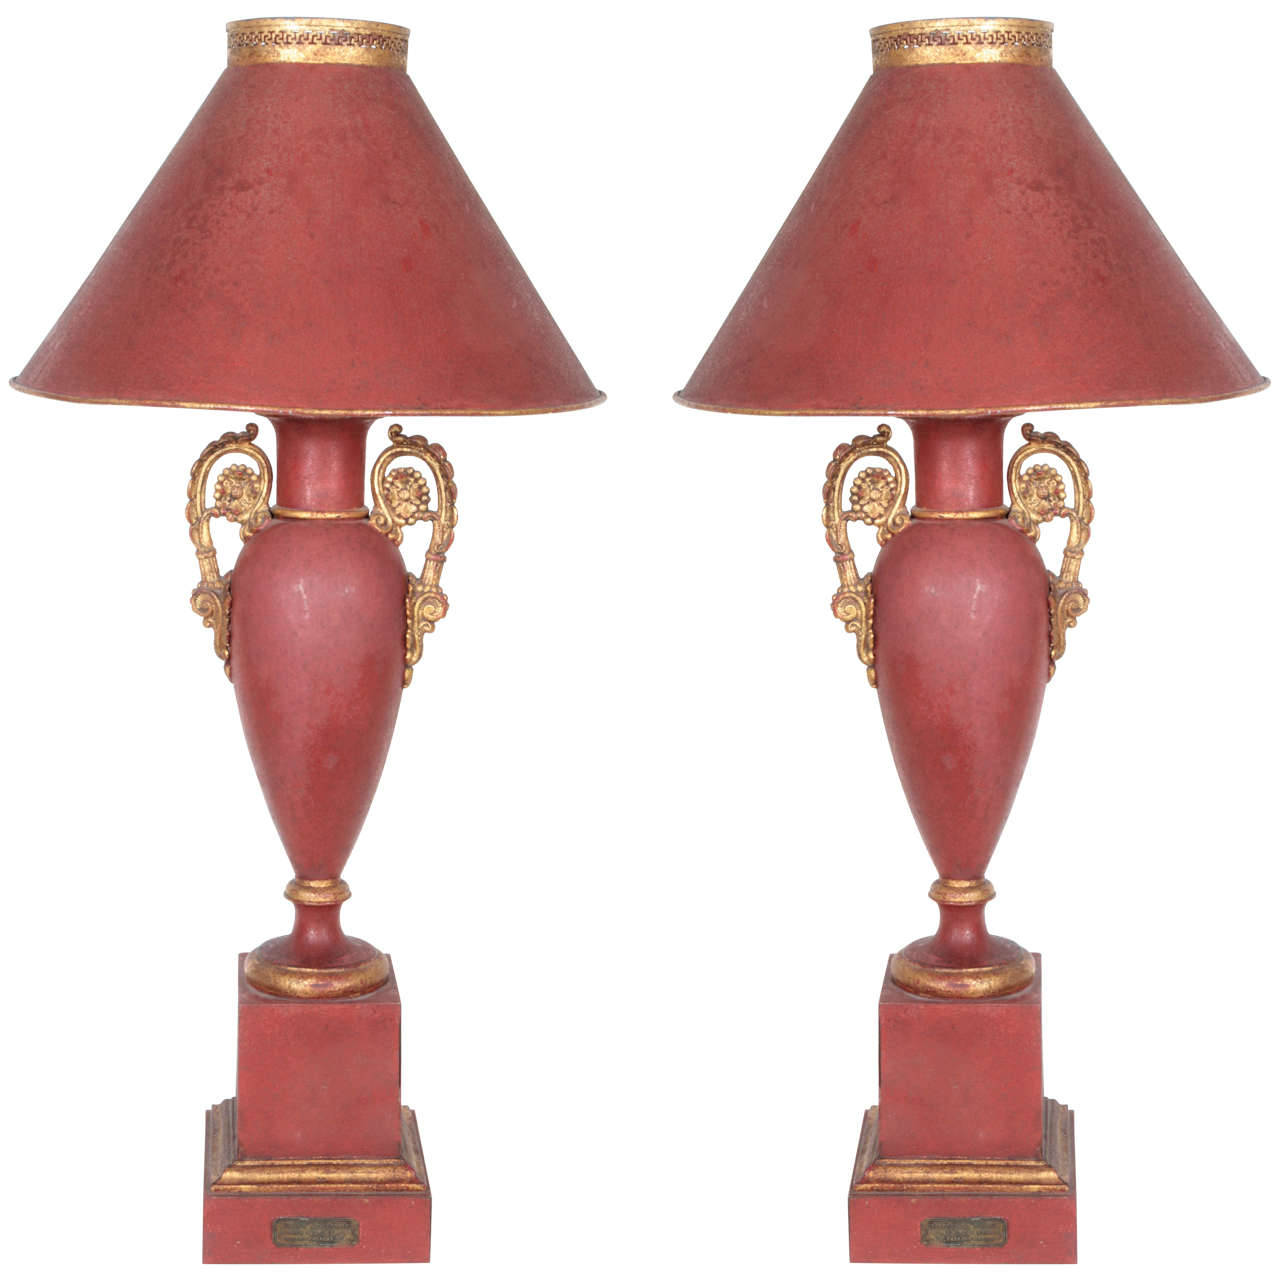 Pair of 19th-Century Metal Louis-Philippe Lamps with Original Matching Shades